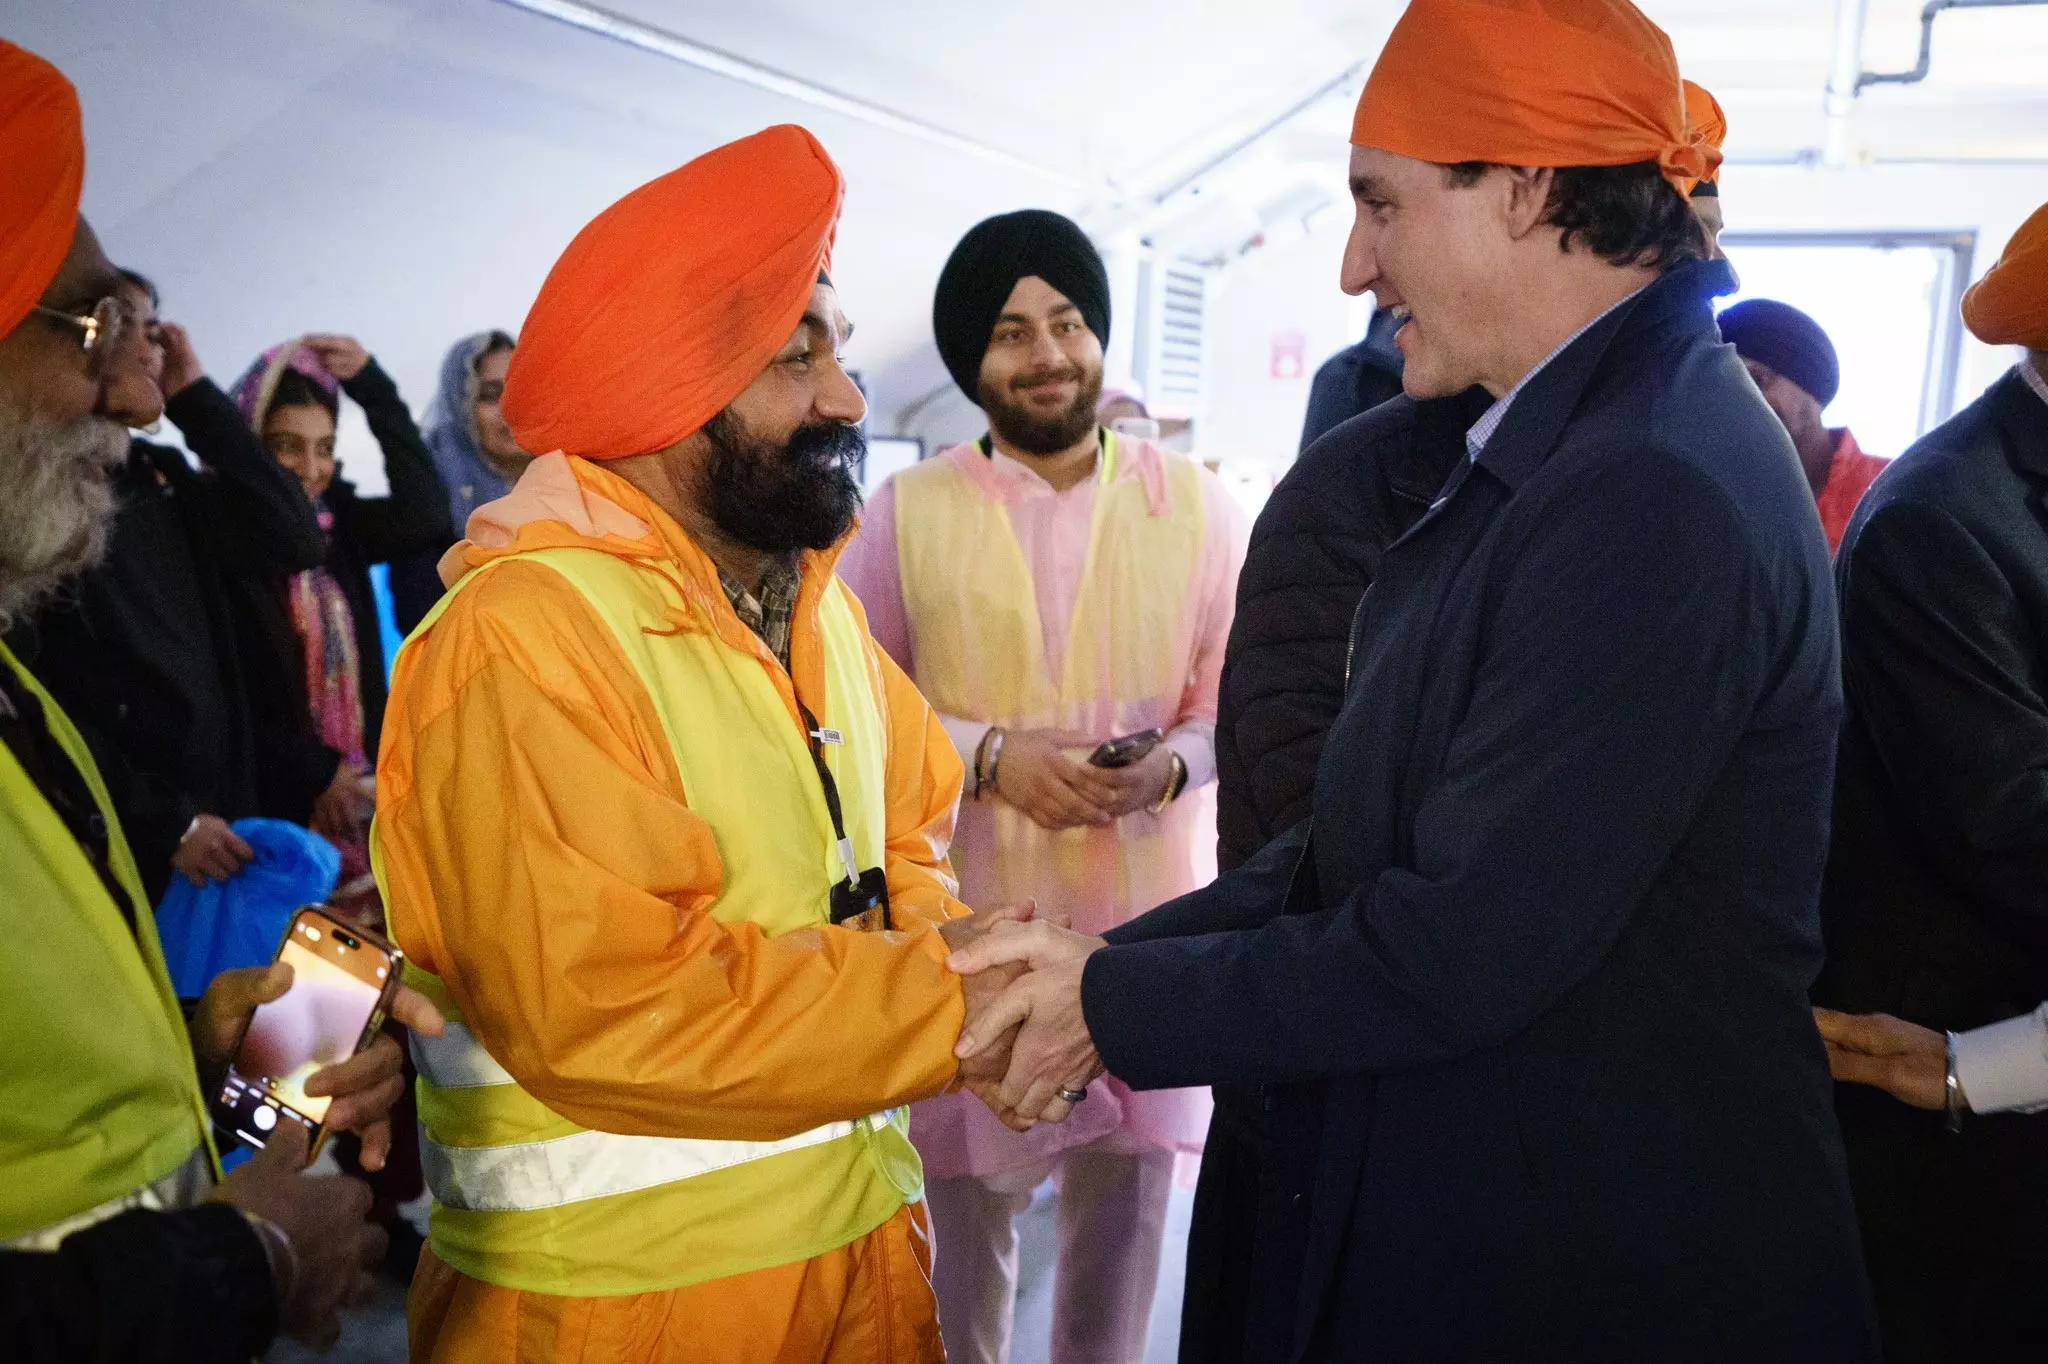 Trudeau vows to protect the rights and freedoms of Sikhs in Canada at all costs